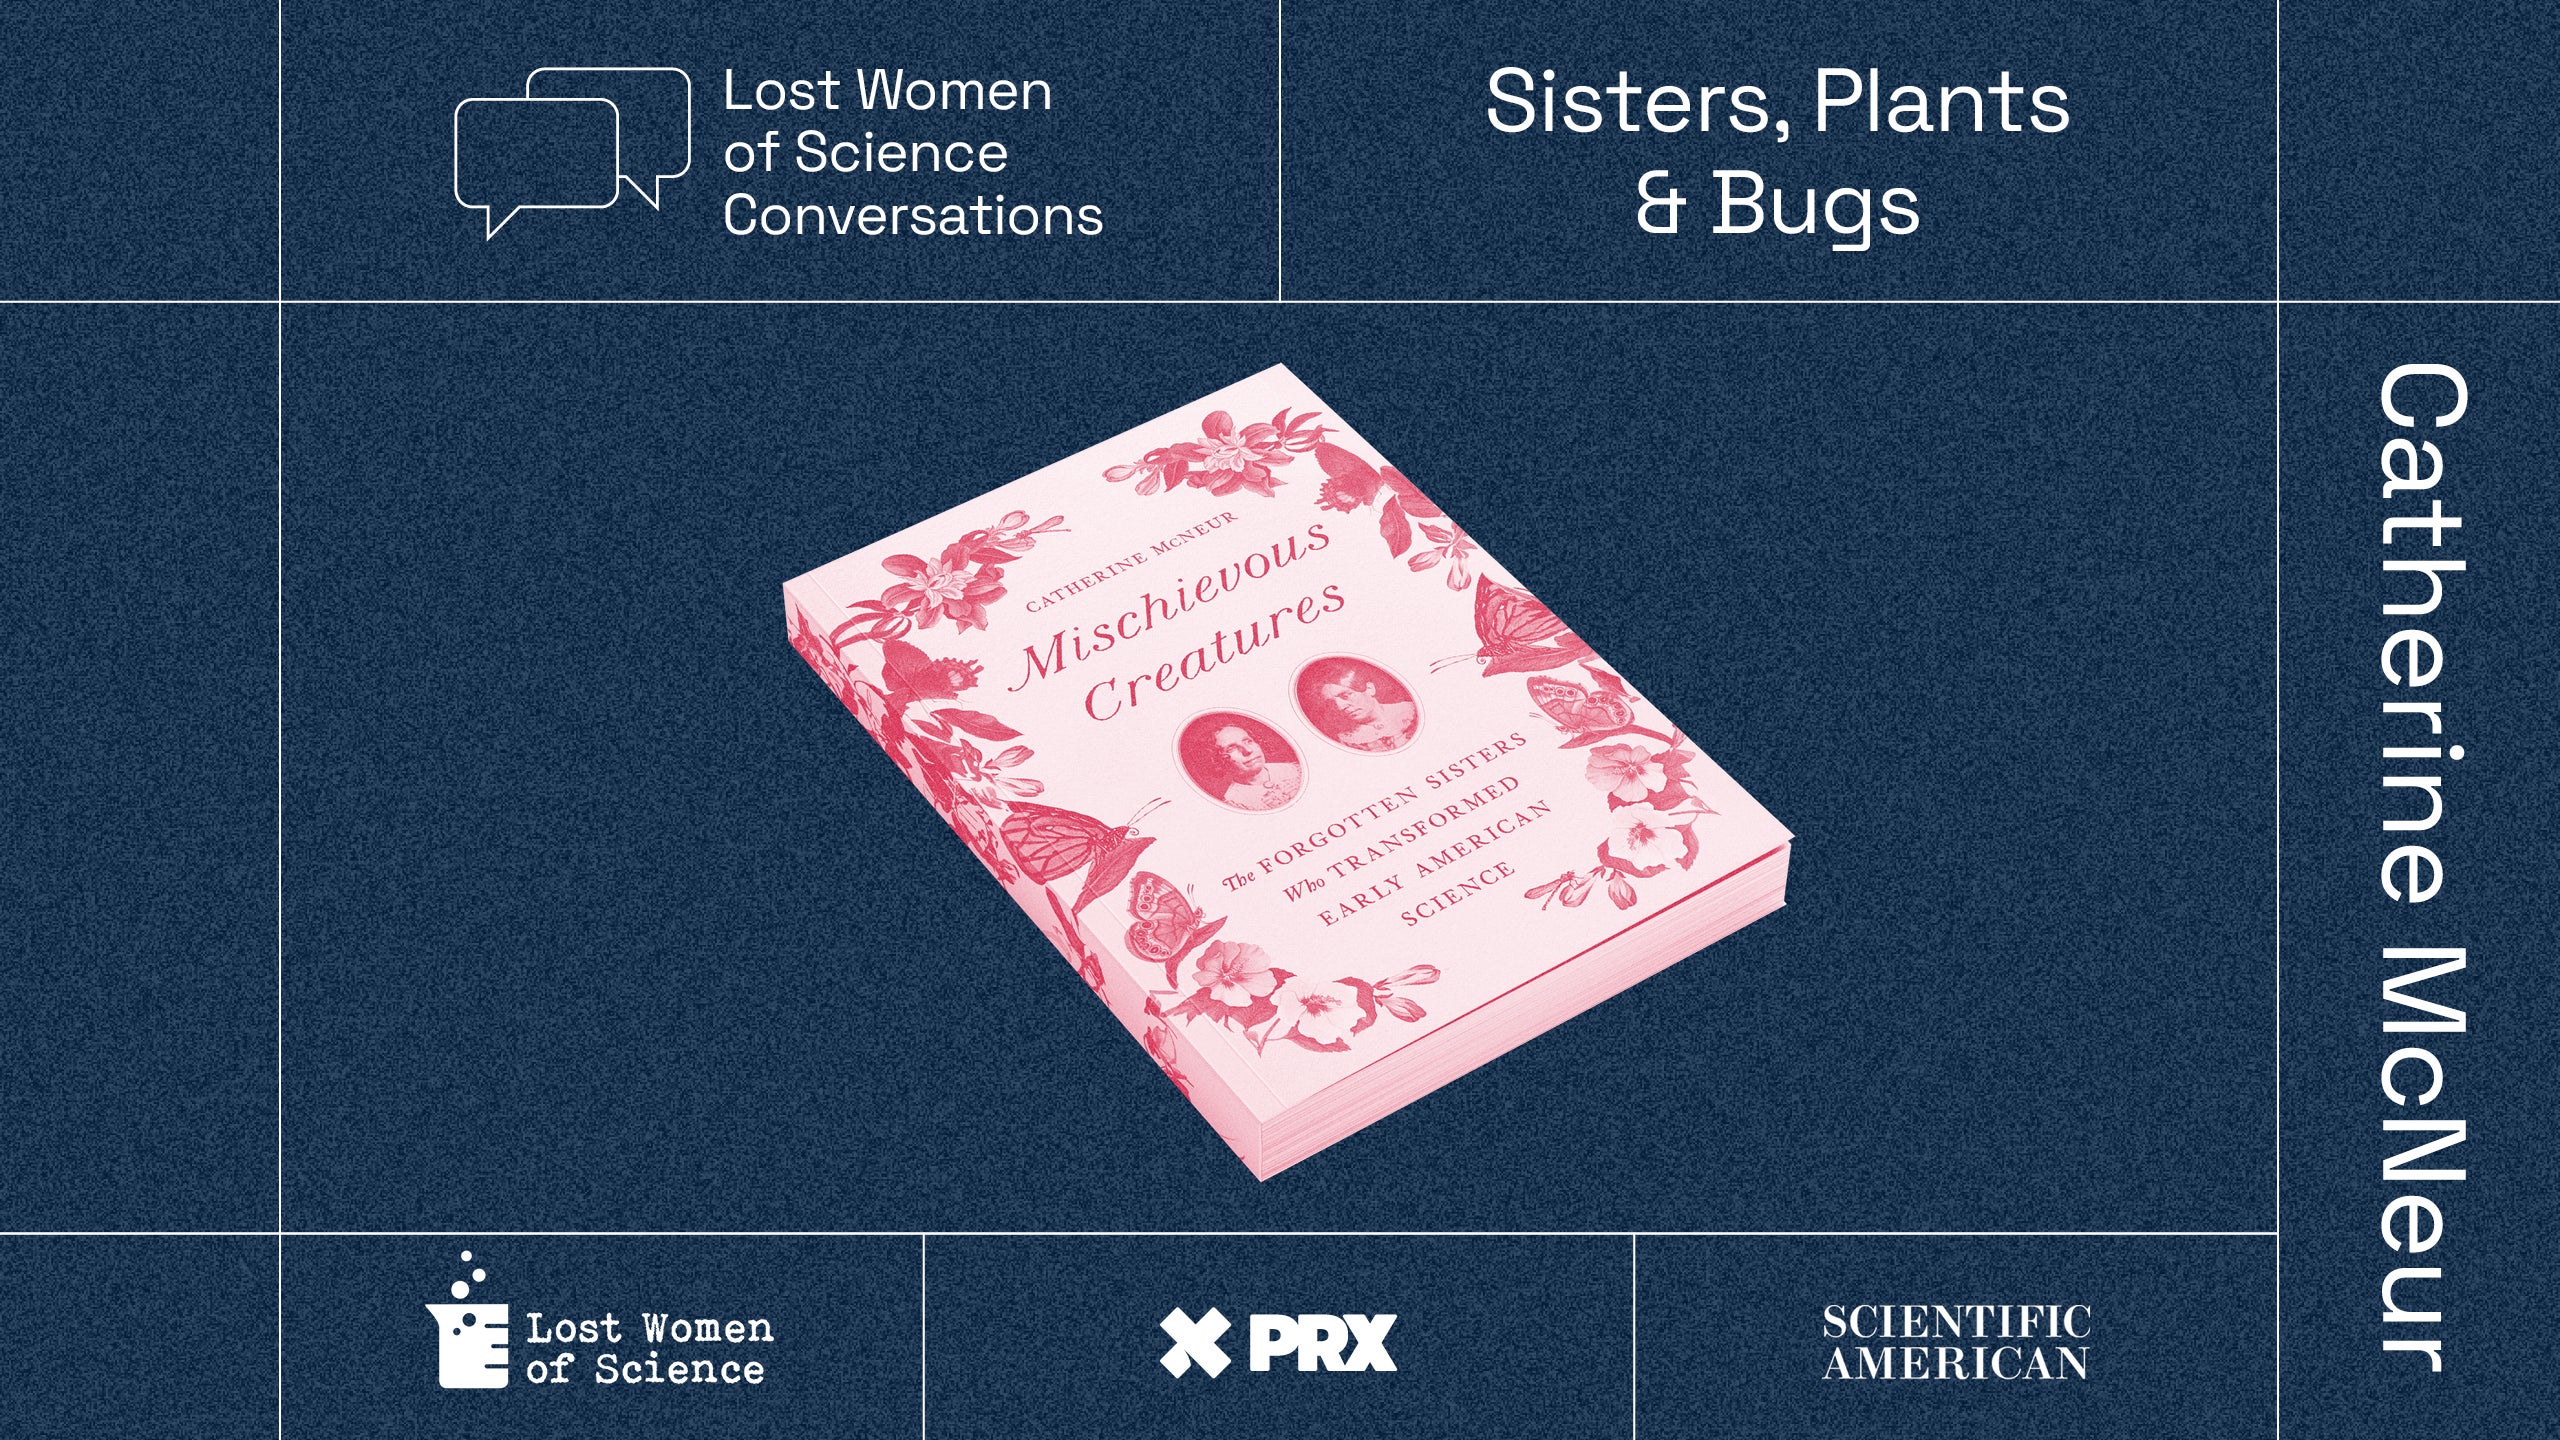 The book "Mischievous Creatures, The Forgotten Sisters Who Transformed Early American Science" with the following text: Lost Women of Science Conversations, Sisters, Plants & Bugs, Catherine McNeur, Lost Women of Science, PRX, and Scientific American